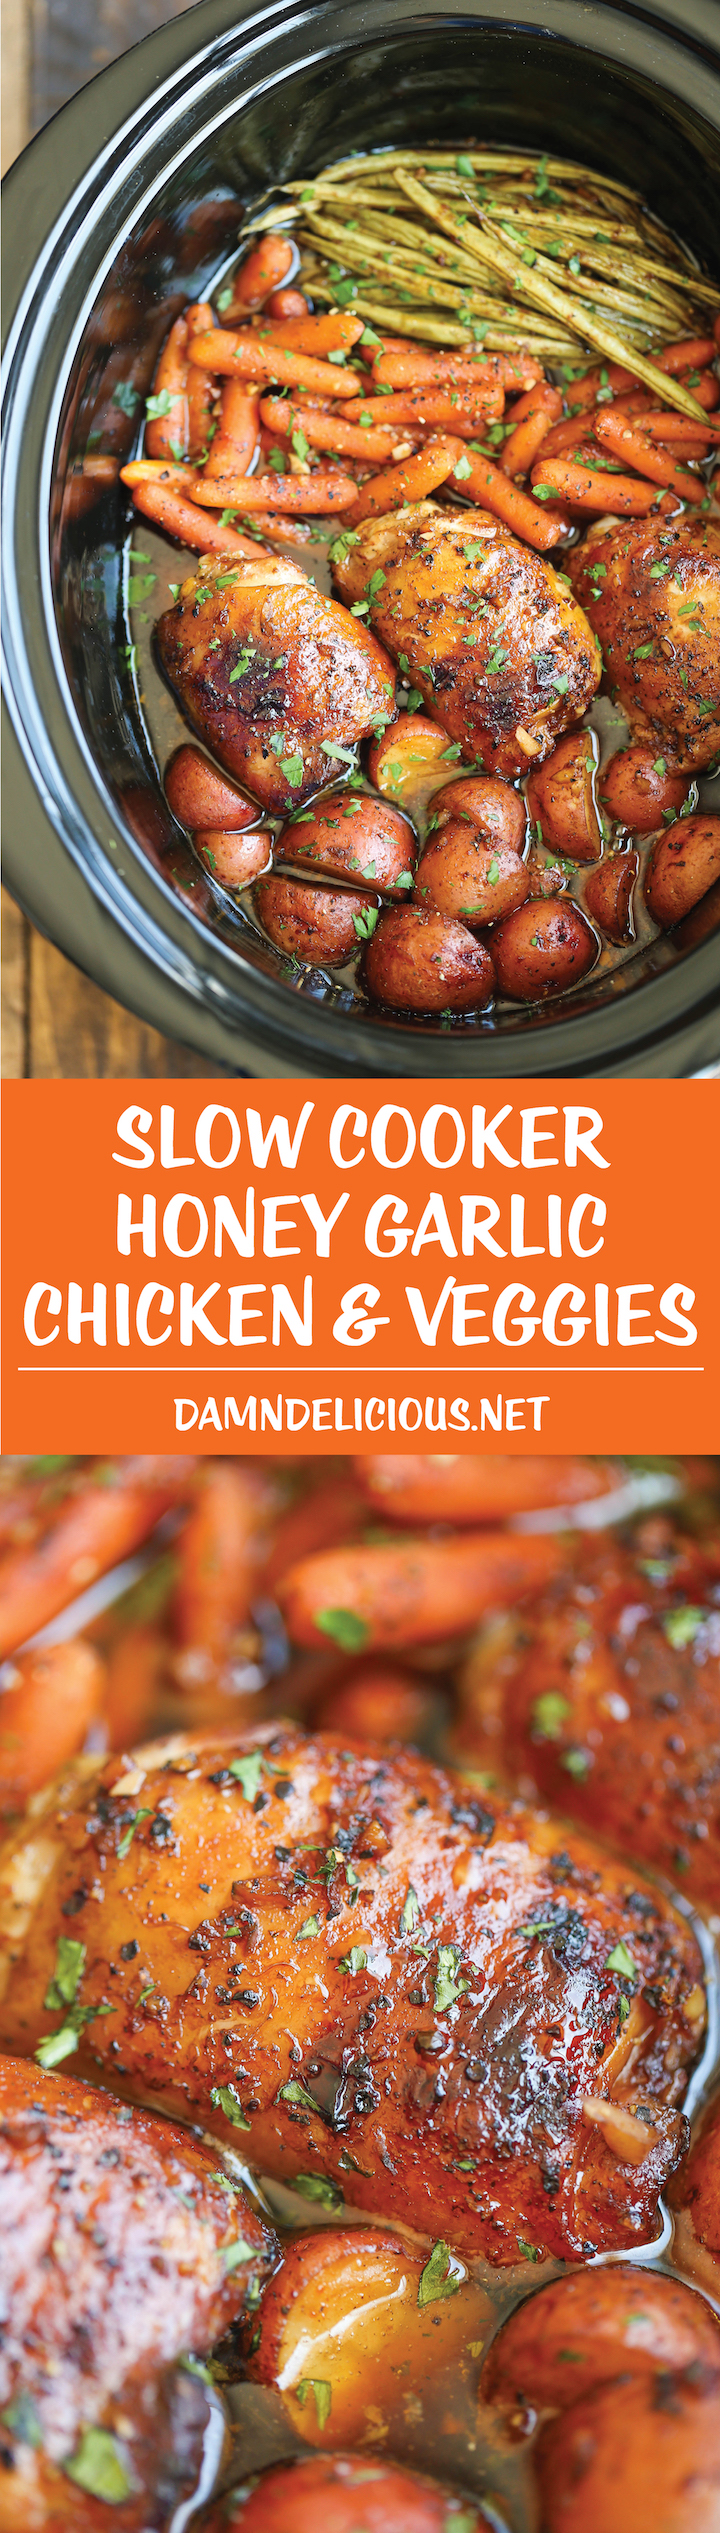 Slow Cooker Honey Garlic Chicken and Veggies | Mouthwatering Crockpot Recipes To Prepare This Winter | Easy Slow Cooker Recipes